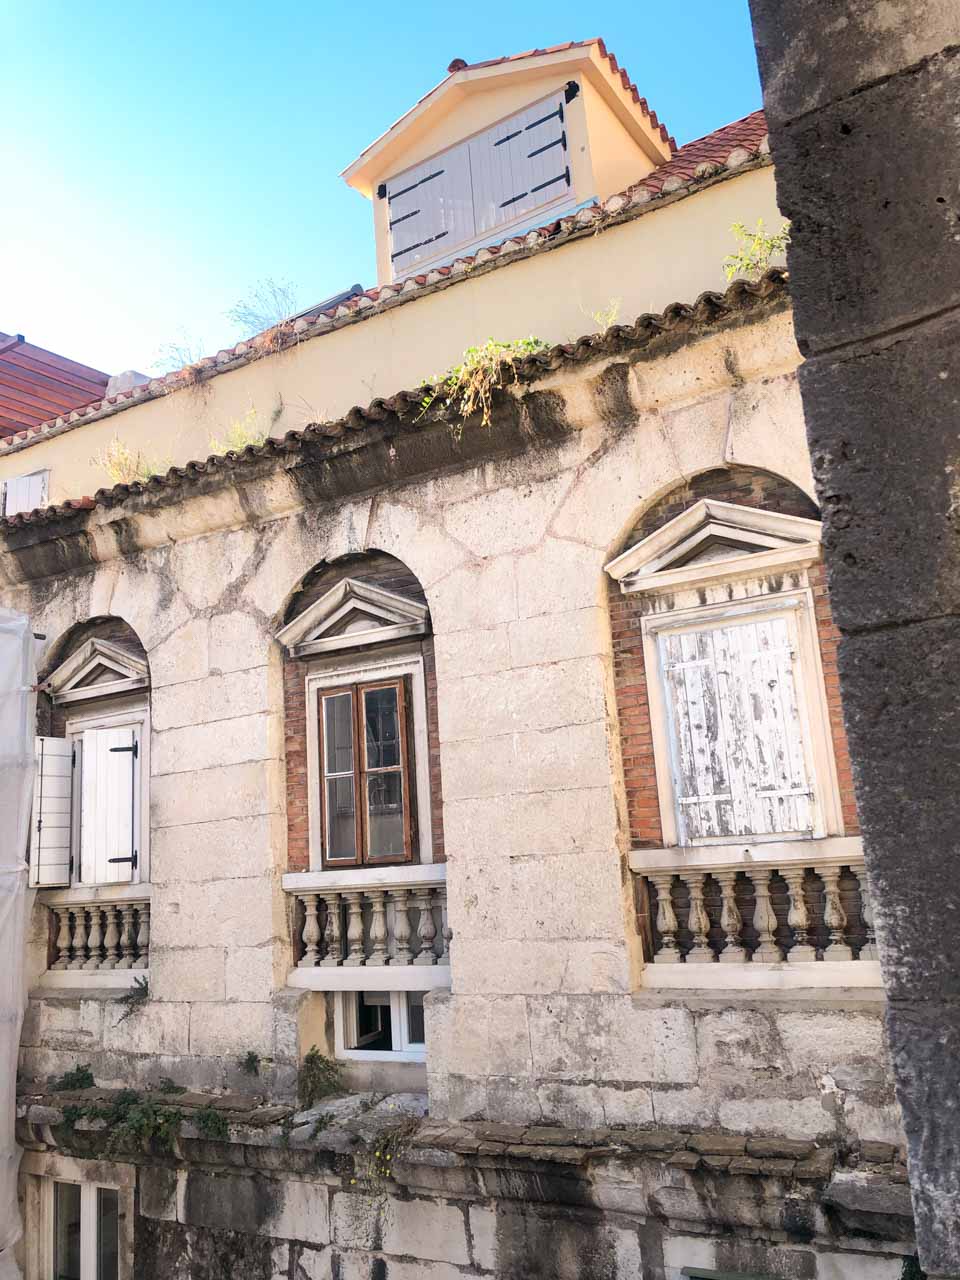 Façade of the former Diocletian's Palace in Split Old Town